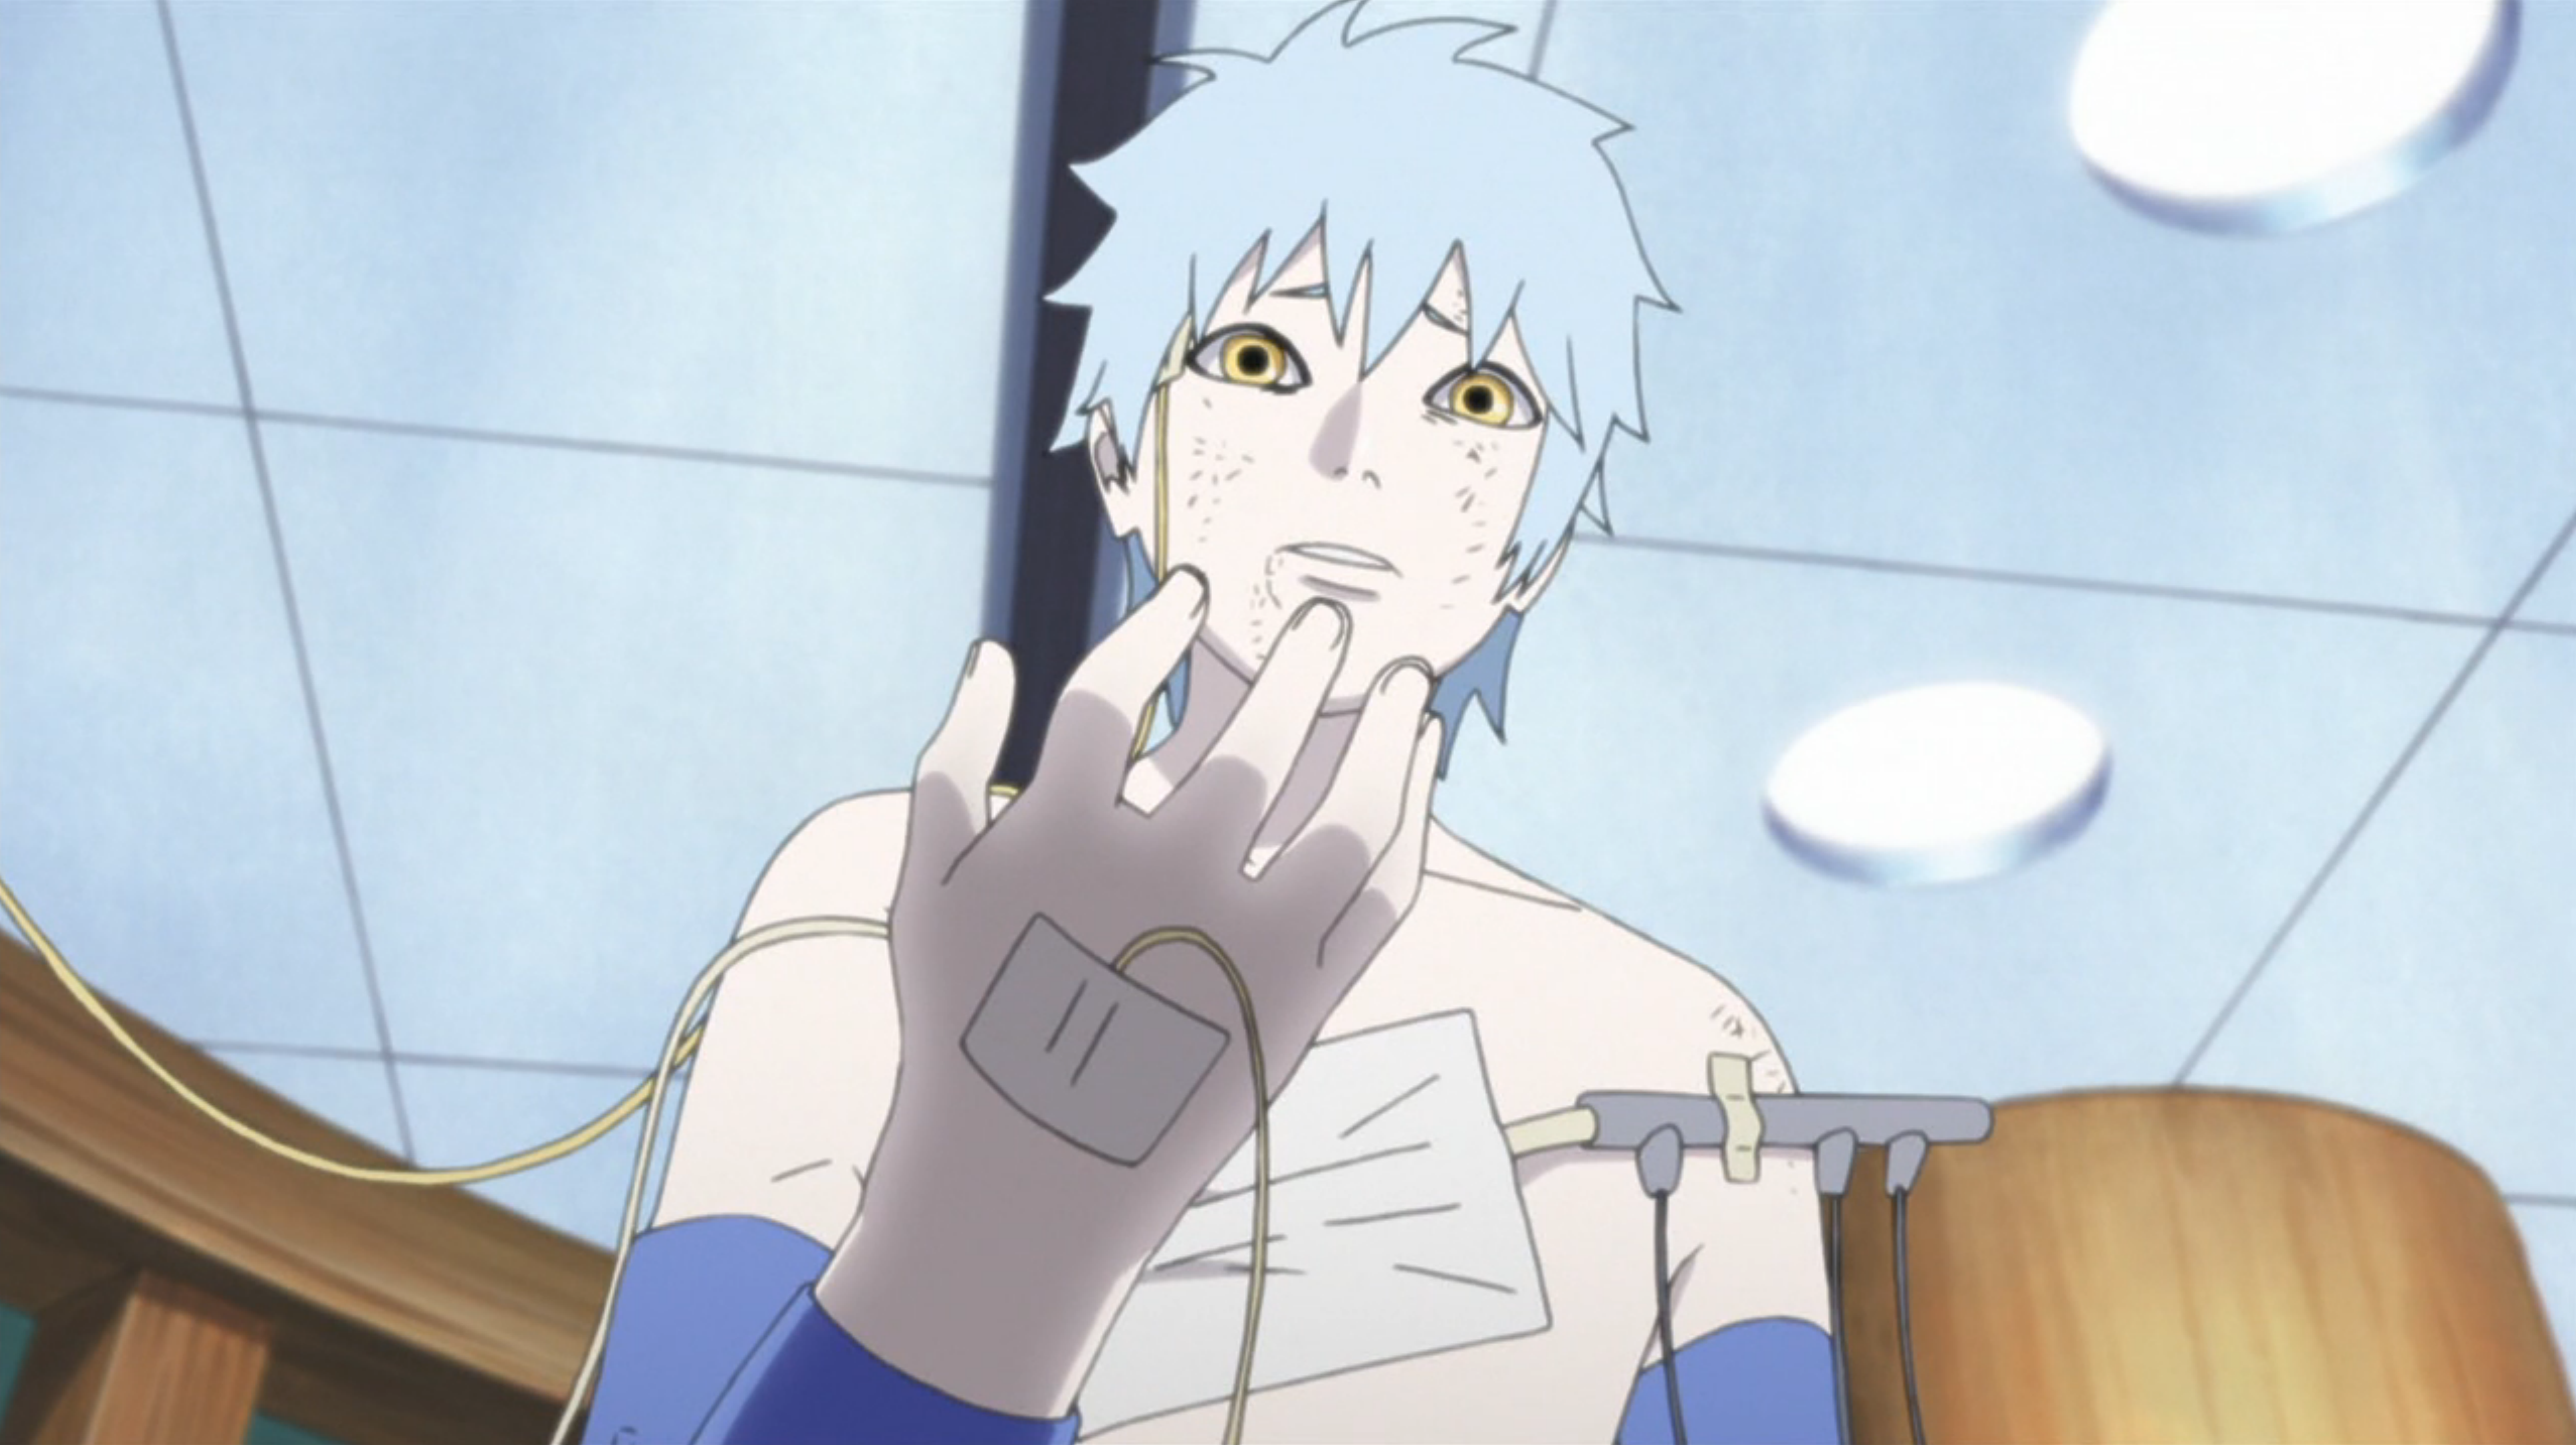 Boruto: Naruto the Movie” touches the hearts and minds